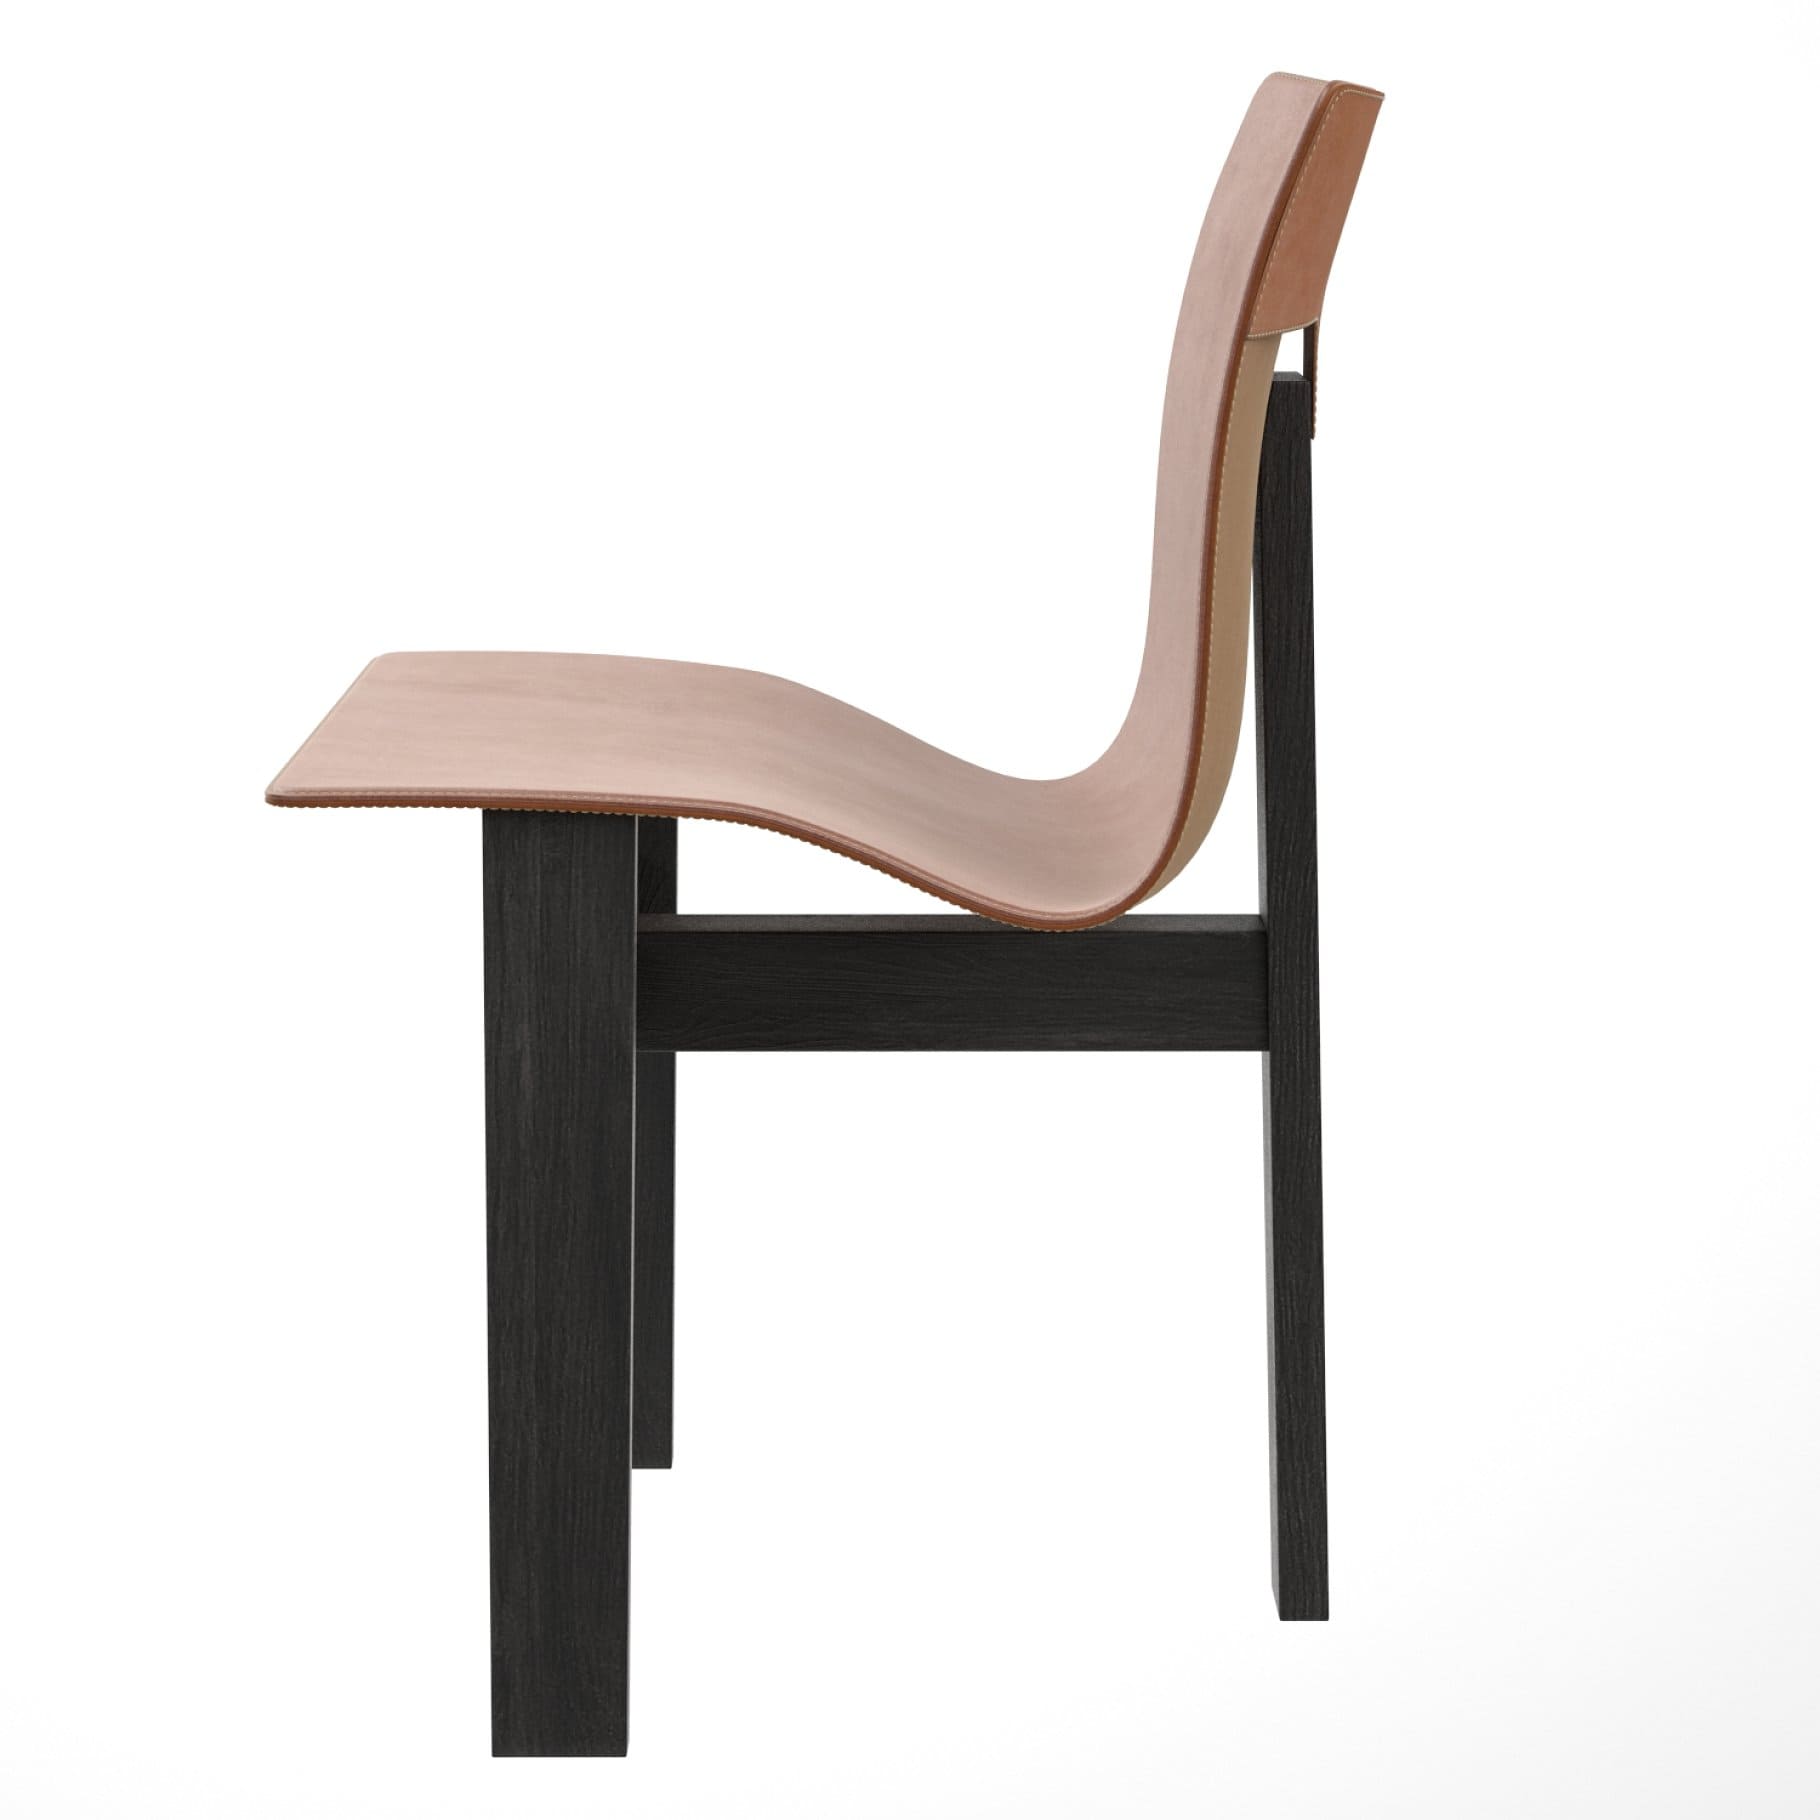 Tre 3 wooden chair with a curved back.